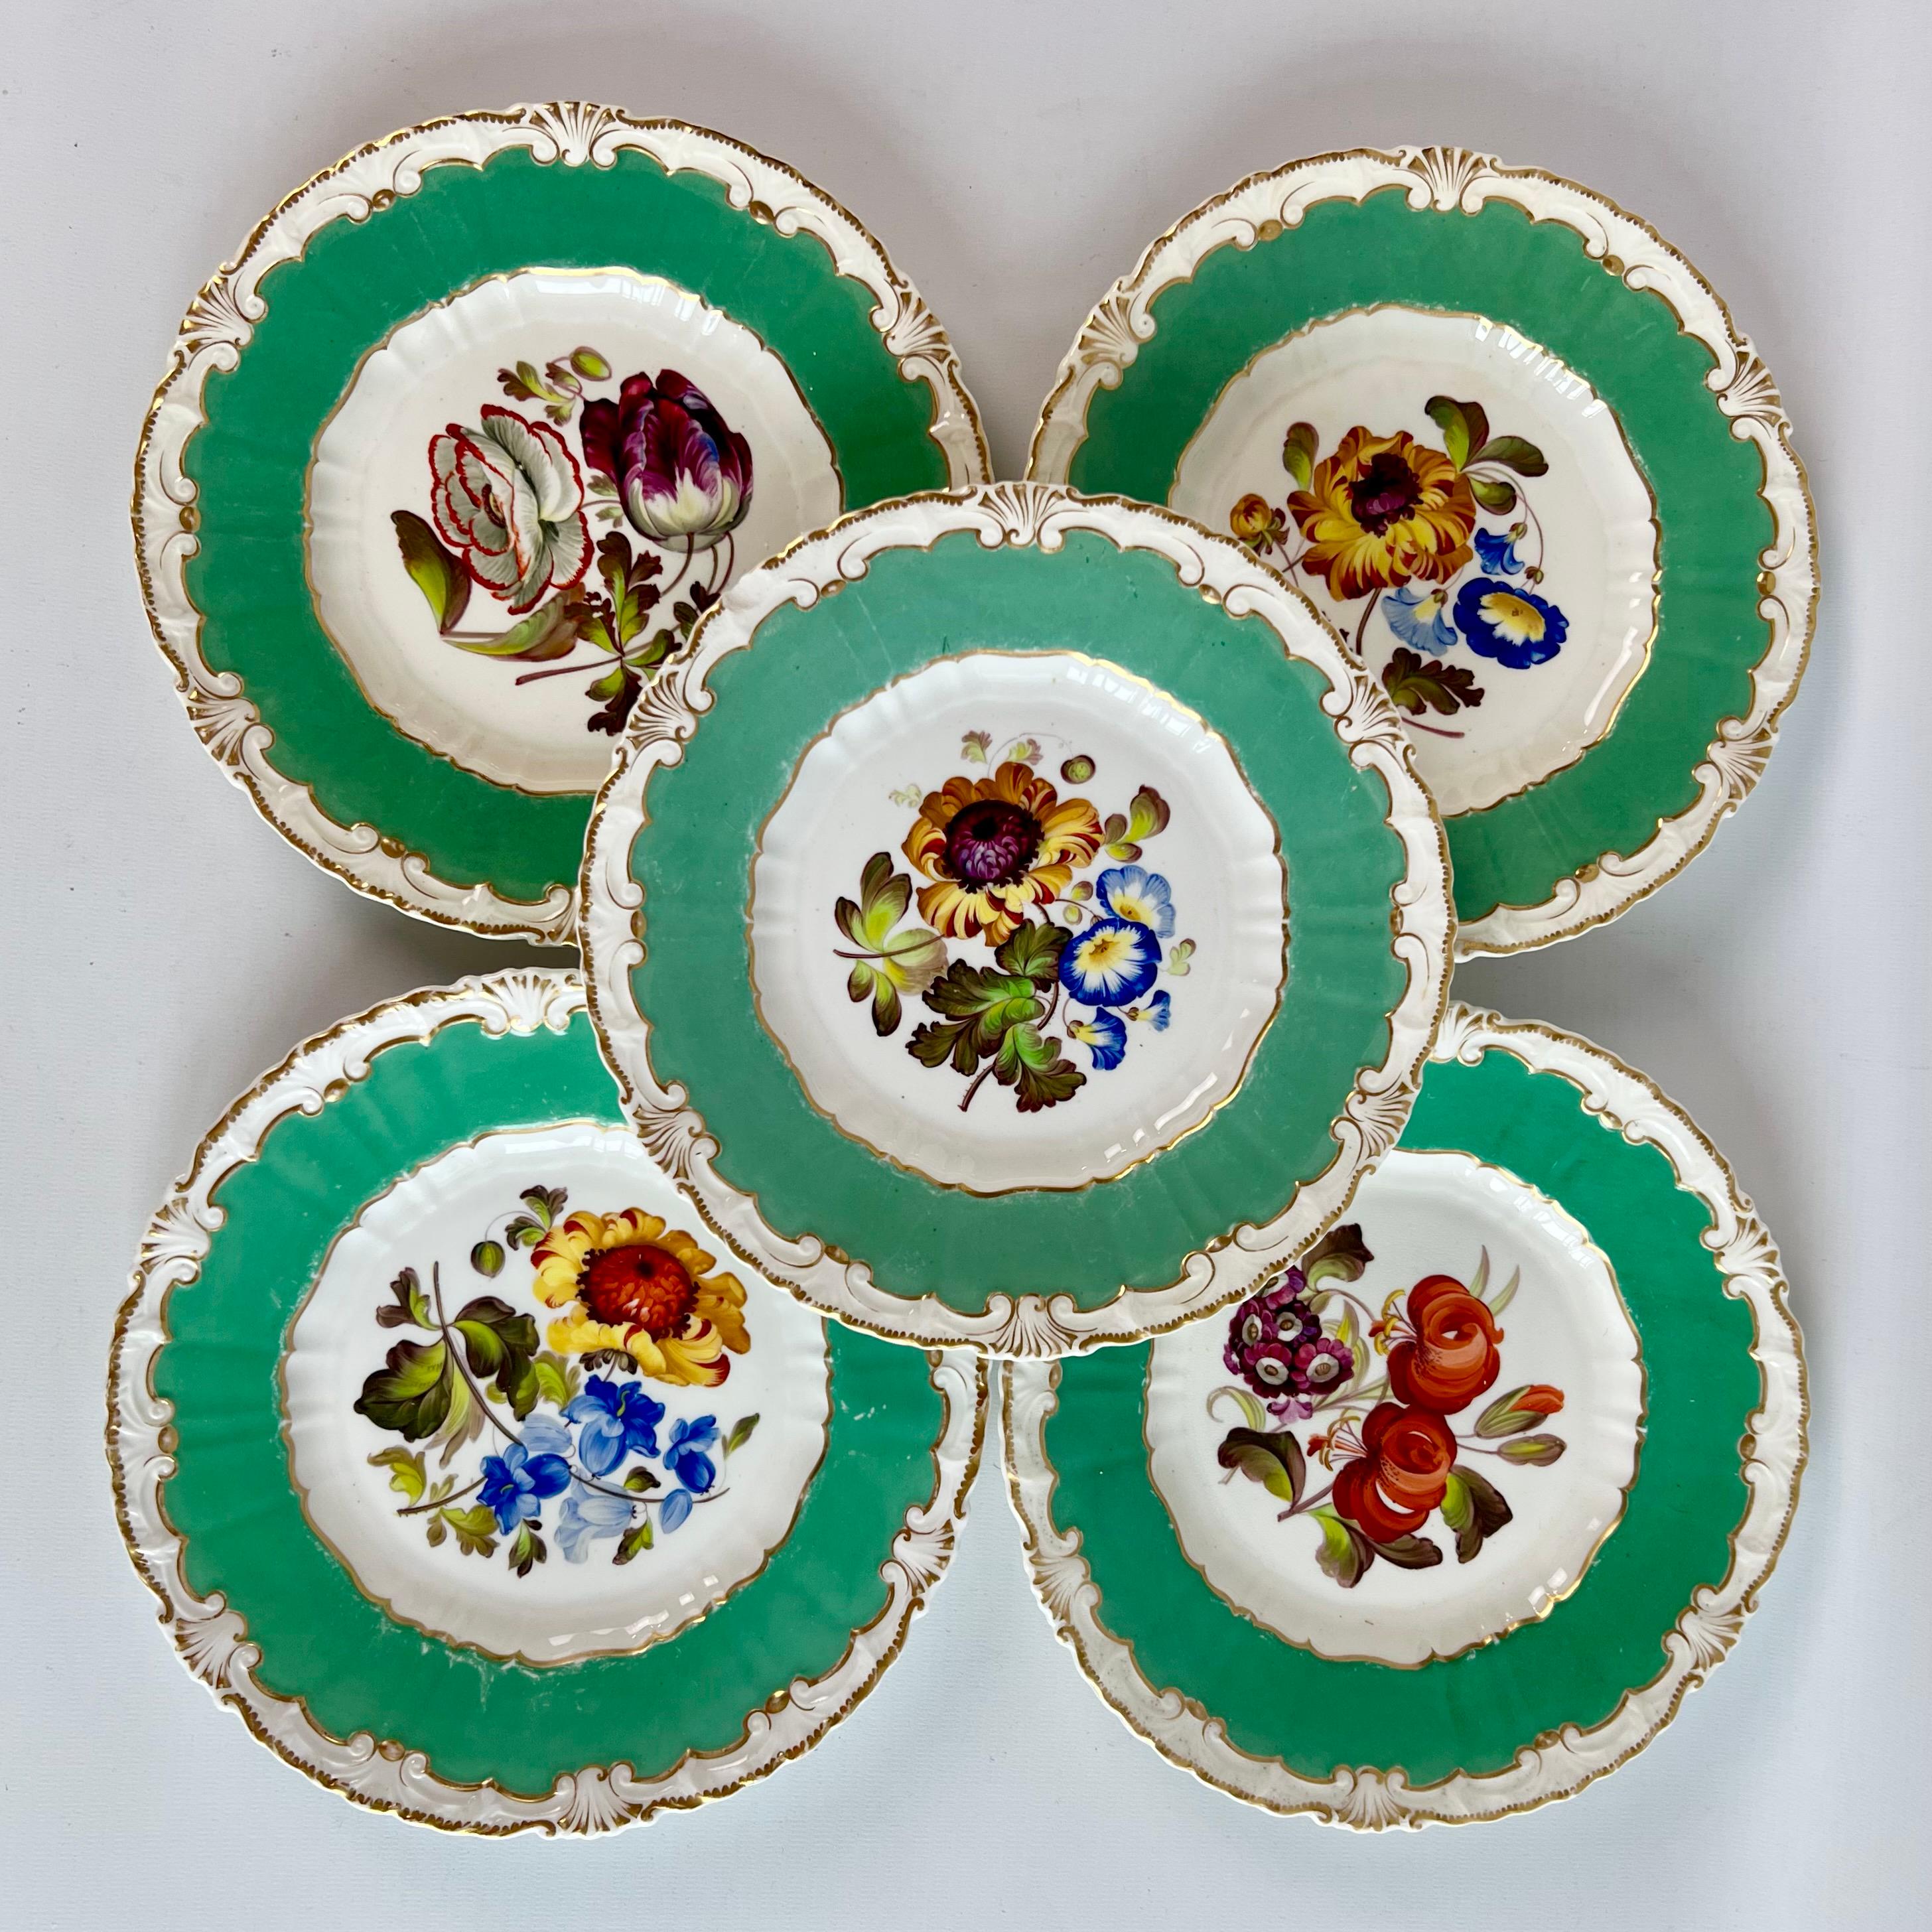 Early 19th Century H & R Daniel Part Dessert Service, Green, Sublime Flowers, Rococo Revival Ca1830